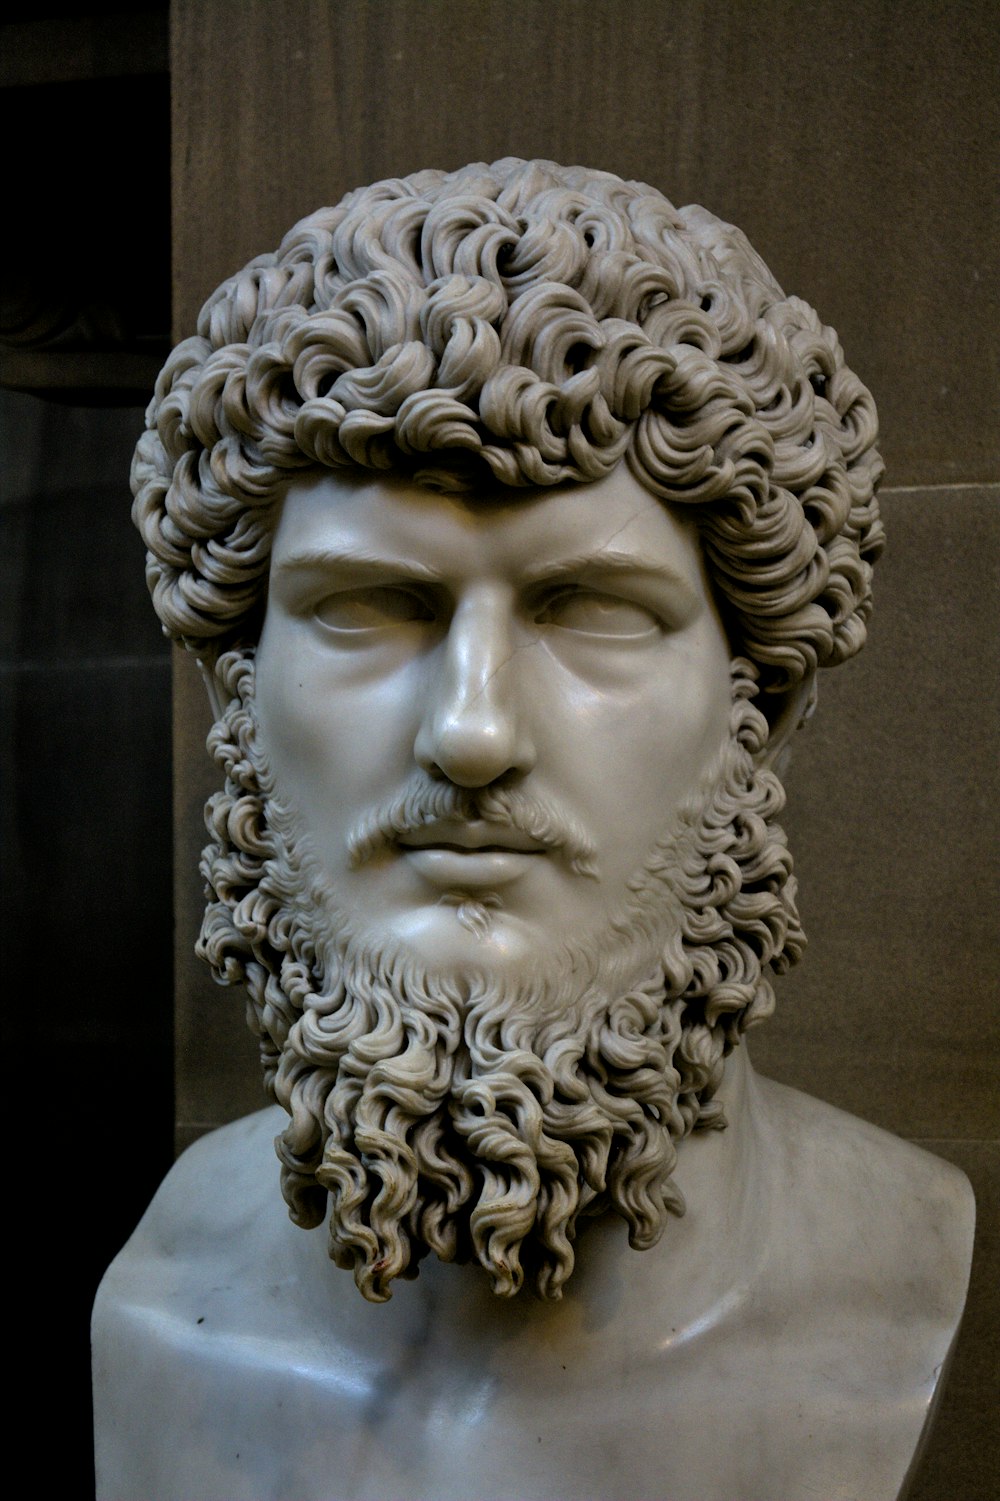 a statue of a man with curly hair and beard